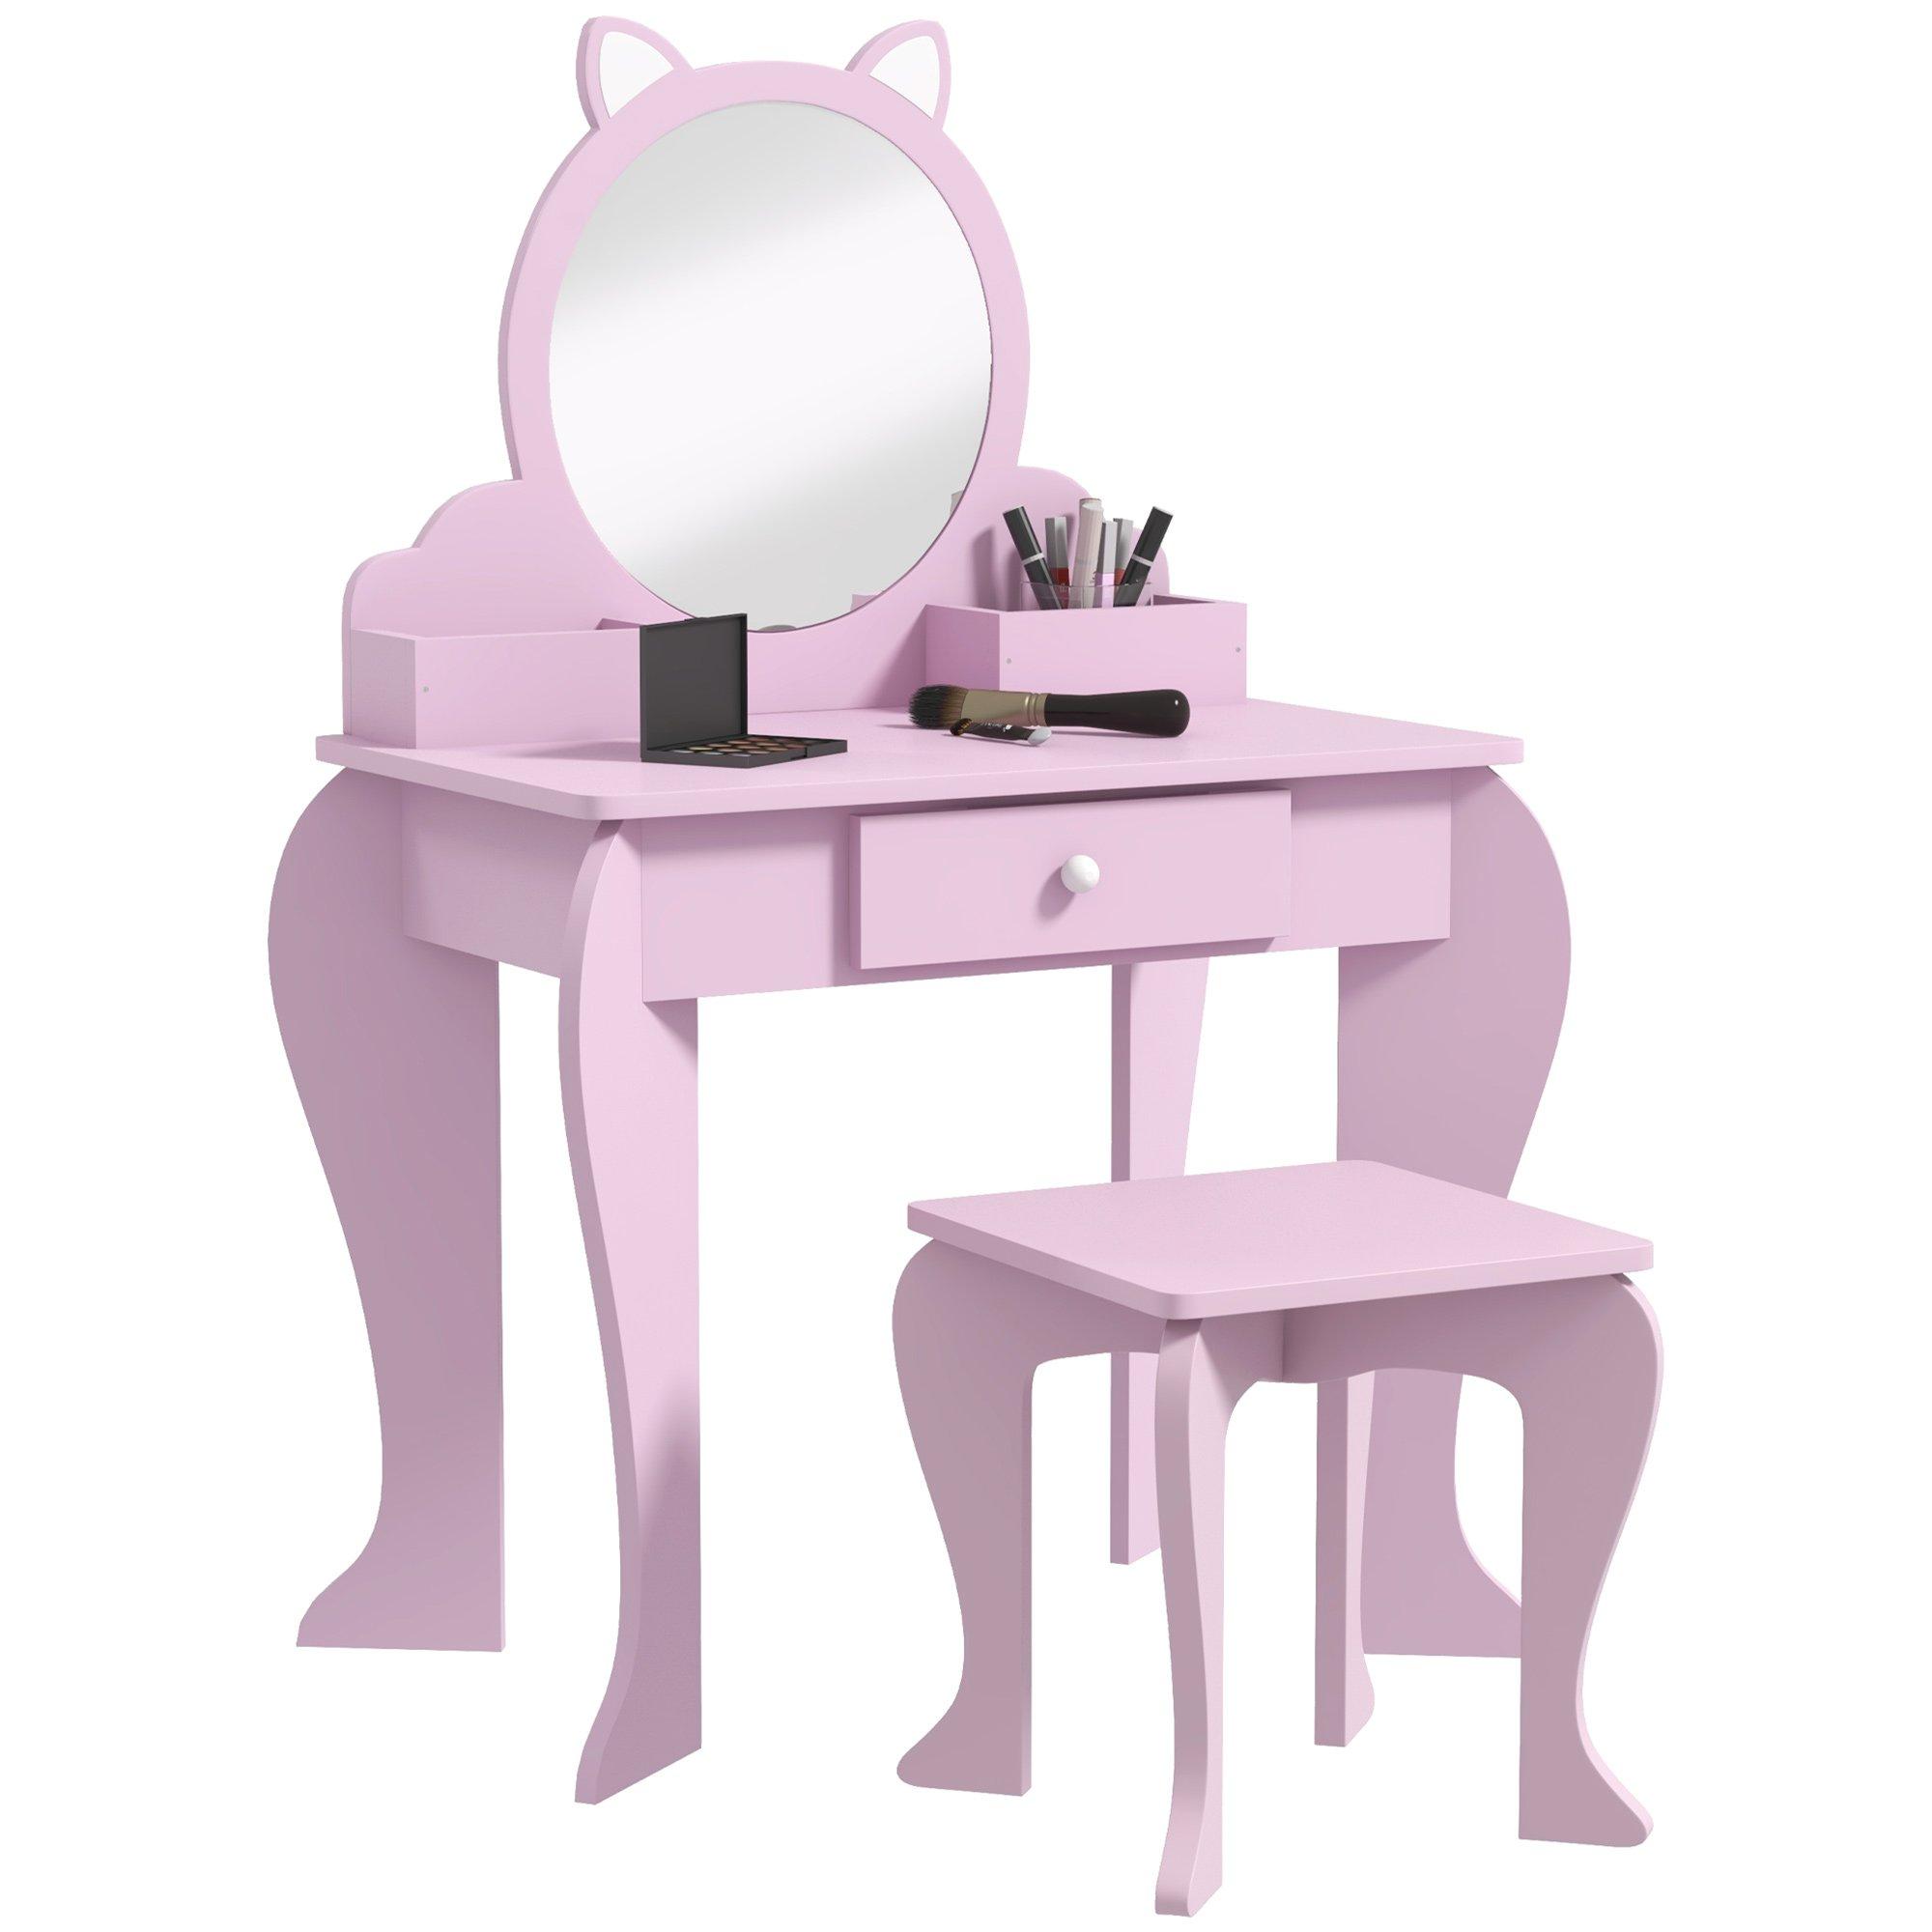 Dressing Table with Mirror and Stool, Drawer, Storage Boxes, Cat Design